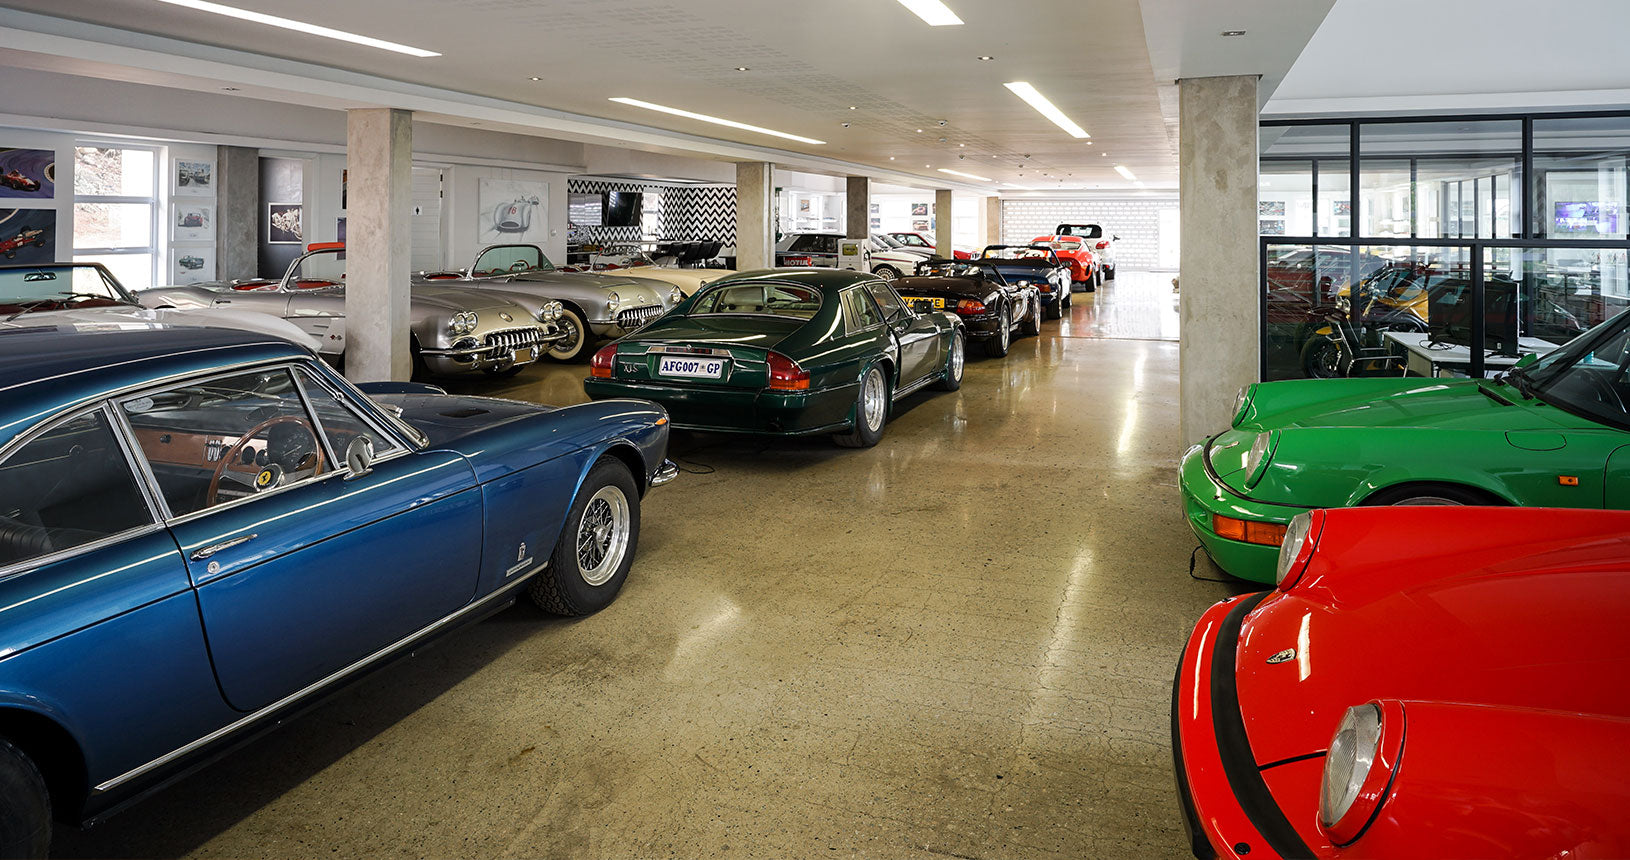 Sports & GT Classics classic car showroom with car storage and classics for sale